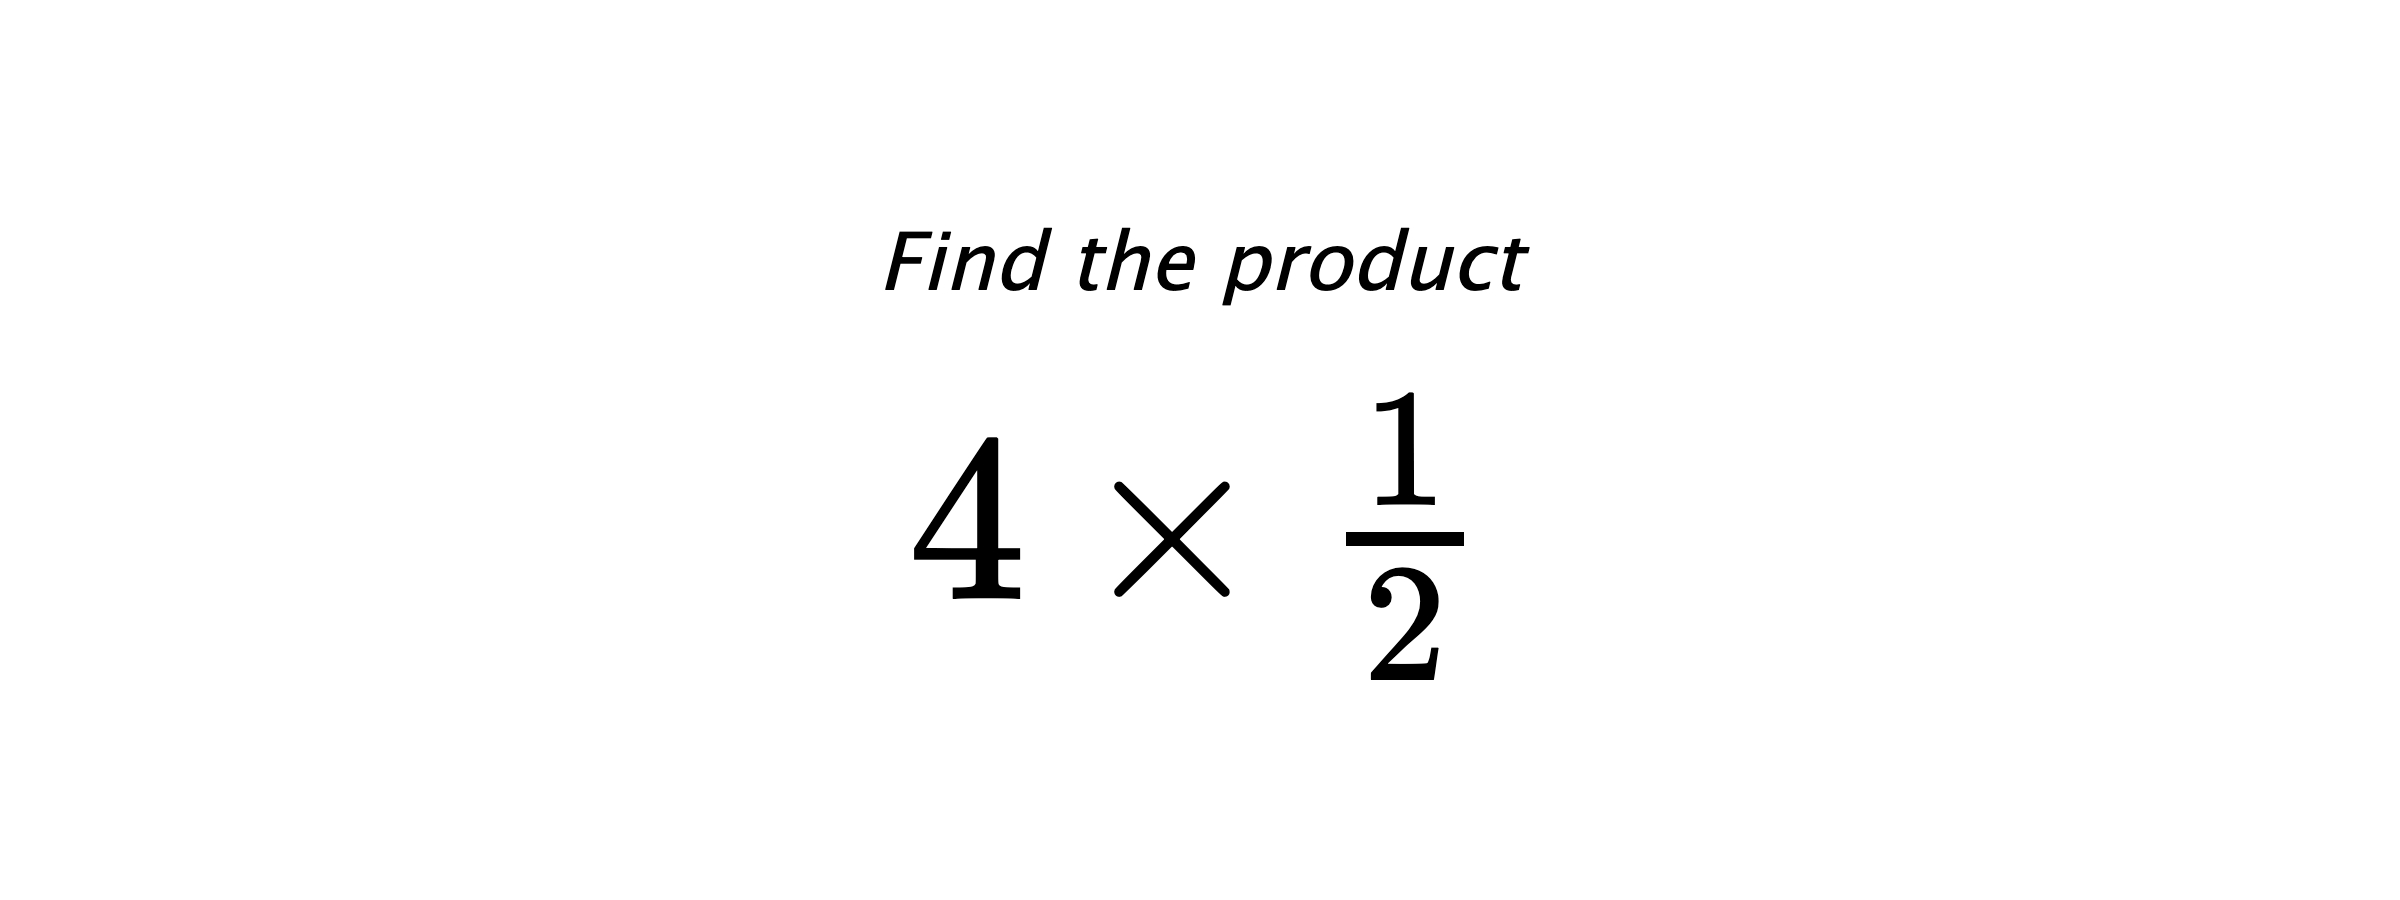 Find the product $ 4 \times \frac{1}{2} $